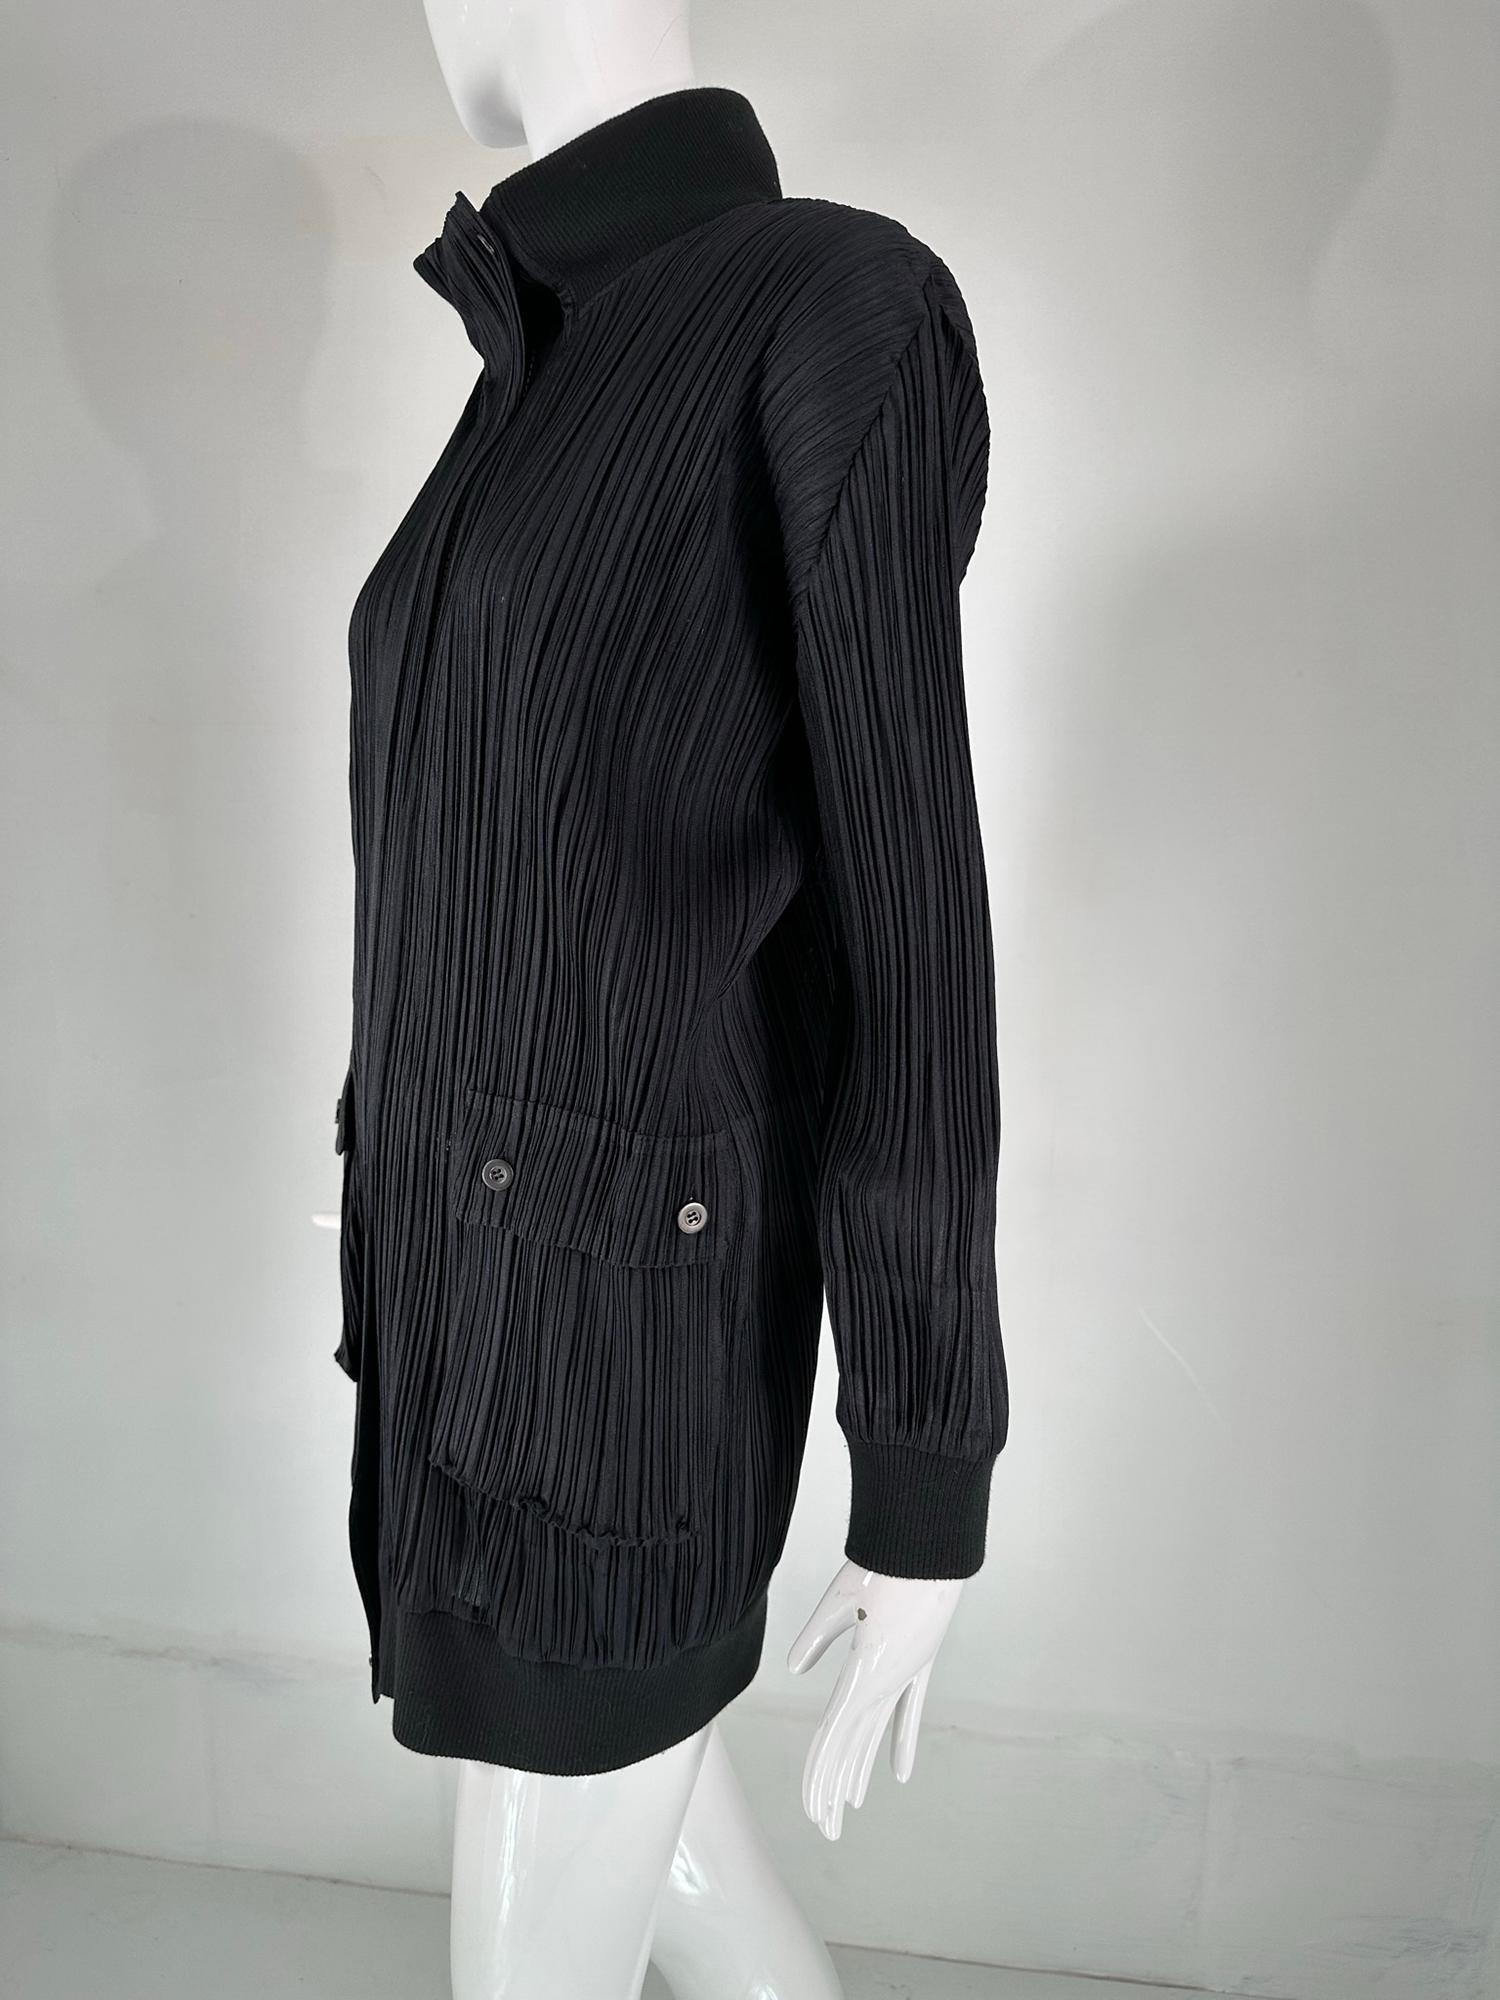 Issey Miyake Pleats Please Black Funnel Neck Hidden Zipper Front Long Jacket 3 In Good Condition For Sale In West Palm Beach, FL